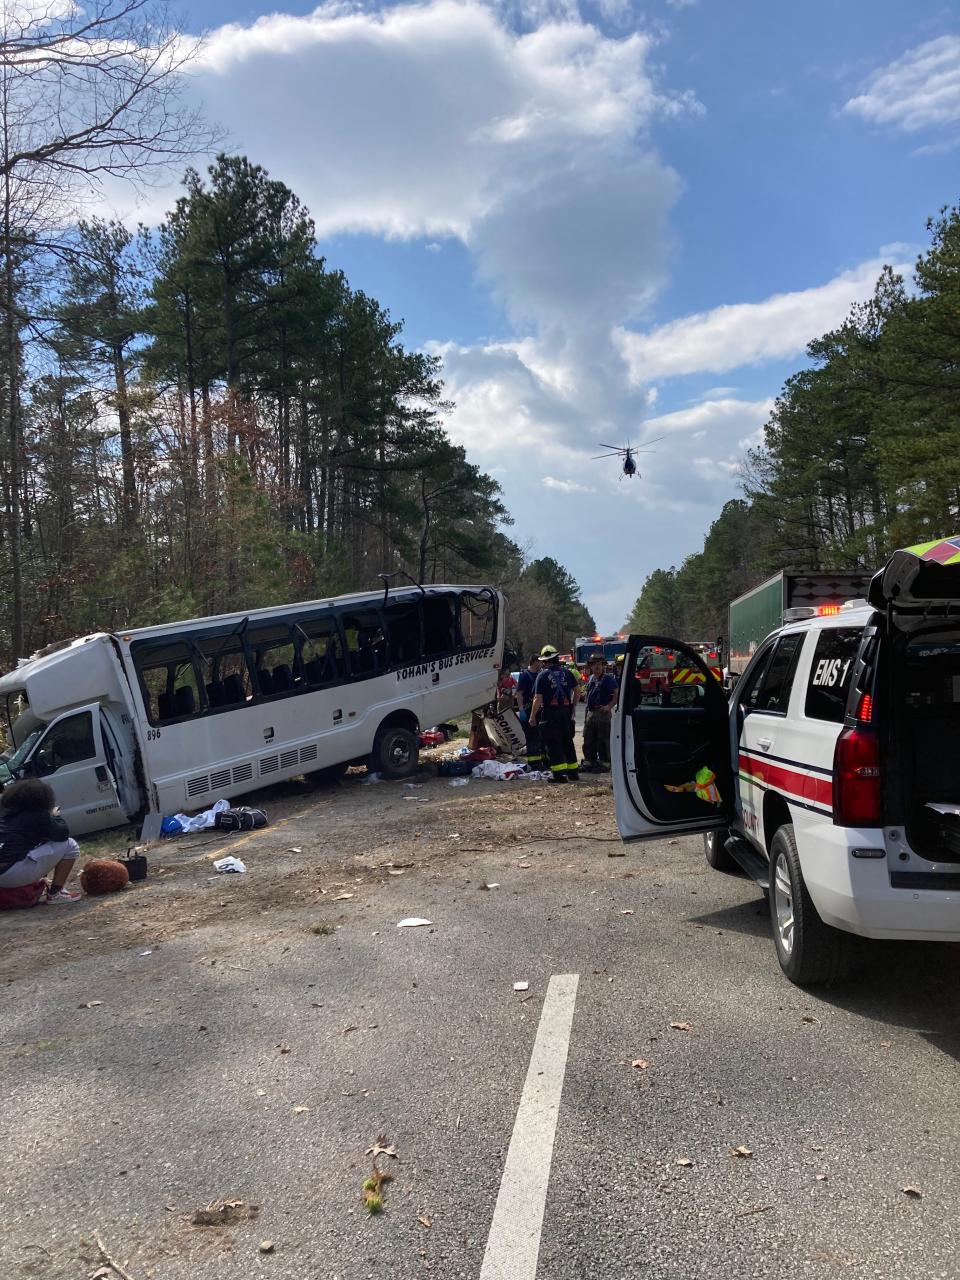 Ten passengers and a bus driver were injured Thursday morning after a charter bus carrying Delaware State University’s women’s bowling team crashed at the site.